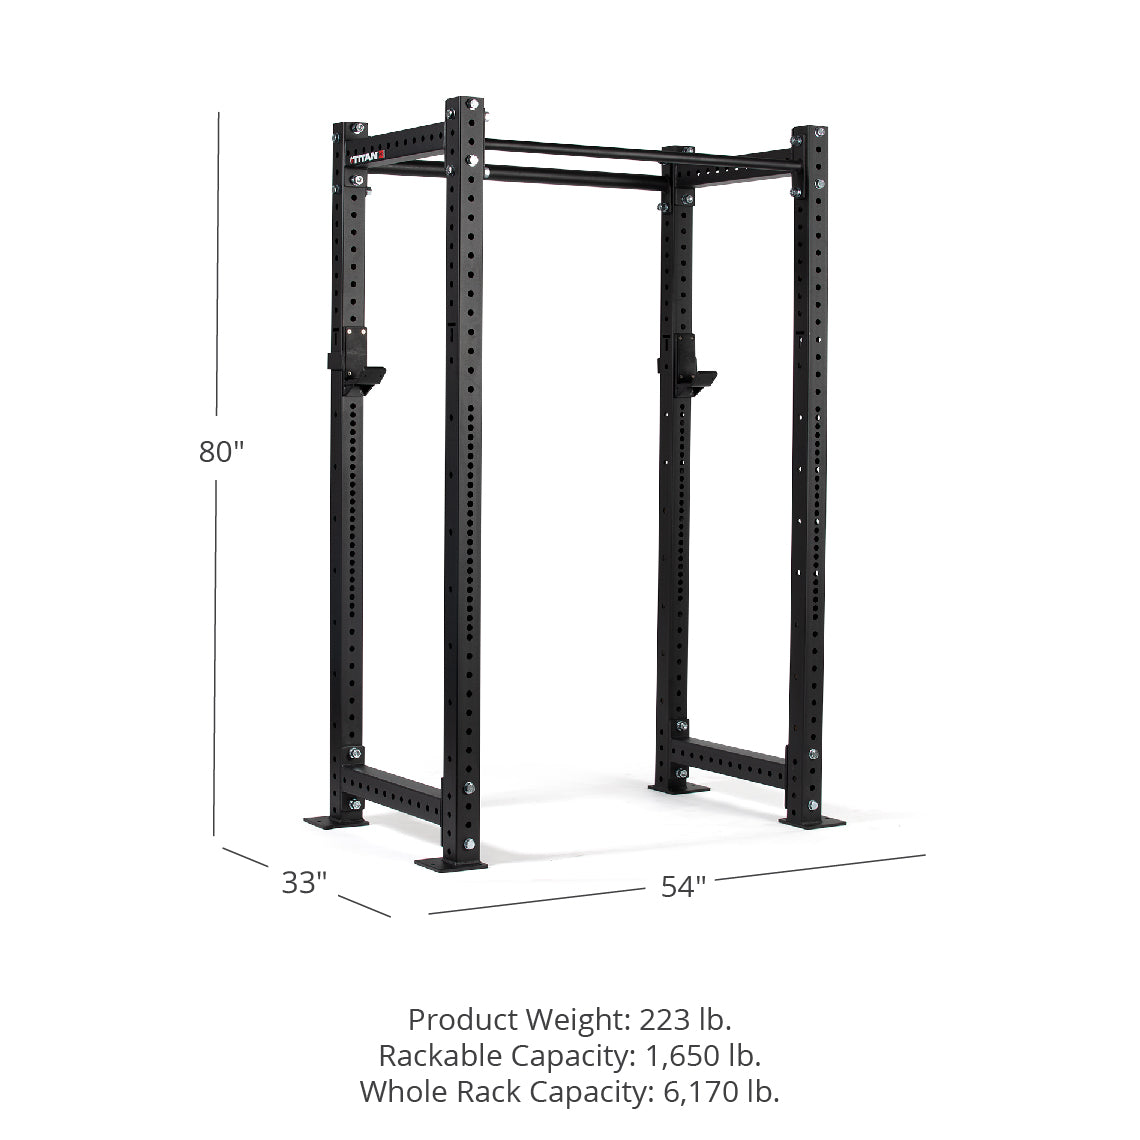 X-3 Series Bolt-Down Power Rack - 90", 30", 54" Product Weight: 236 lb. Rackable Capacity: 1,650 lb. Whole Rack Capacity: 6,170 lb | Black / No Weight Plate Holders